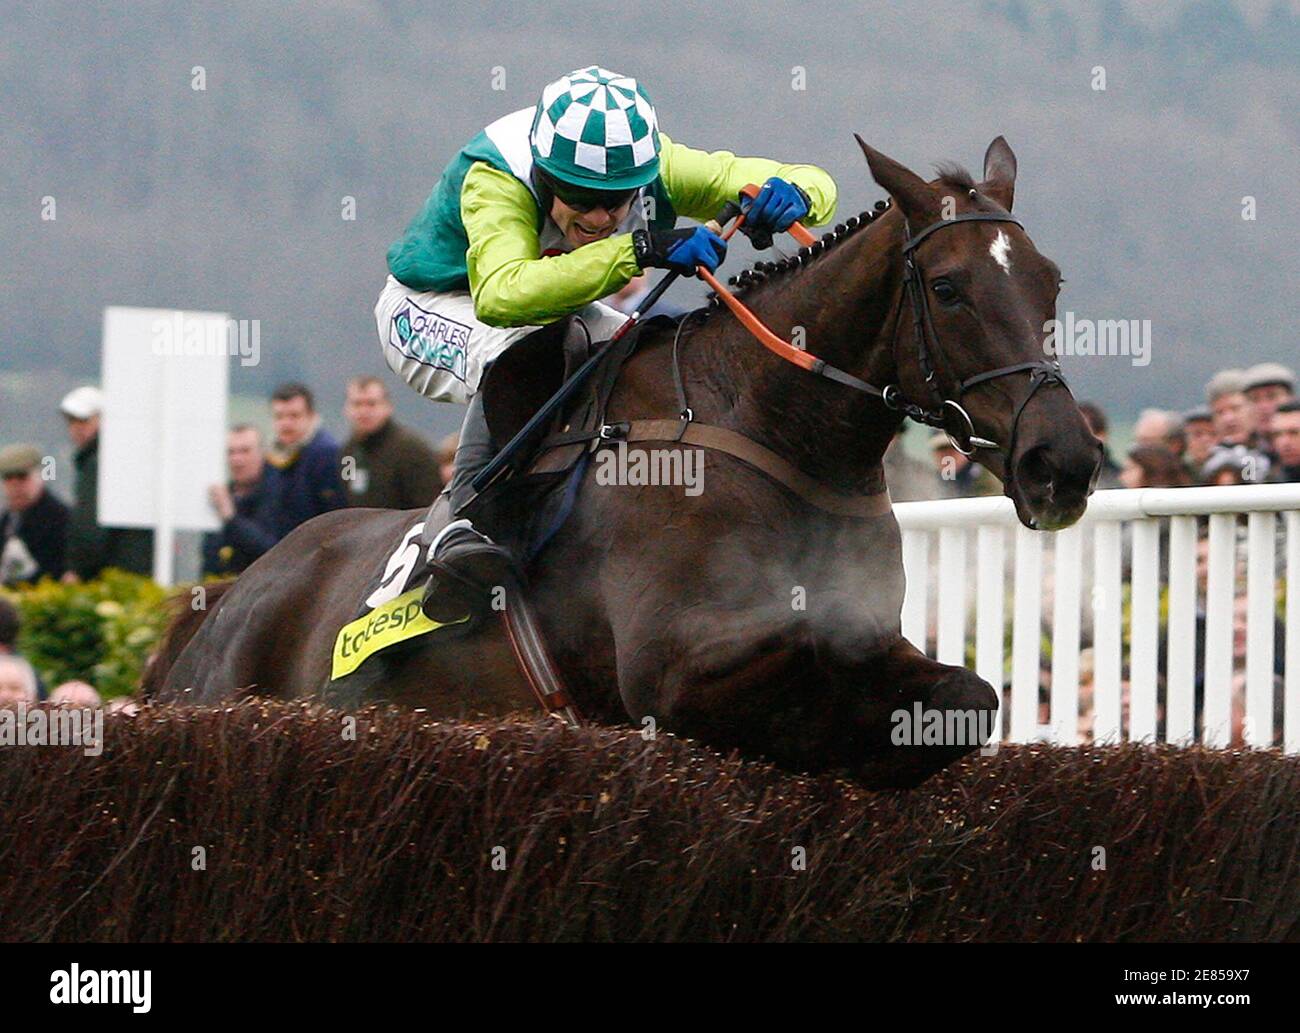 Sam Thomas on Denman jumps the last fence to win the totesport Cheltenham Gold Cup Steeple Chase on the fourth day of the Cheltenham Festival horse racing in Gloucestershire, western England, March 14, 2008. REUTERS/Eddie Keogh (BRITAIN) Stock Photo